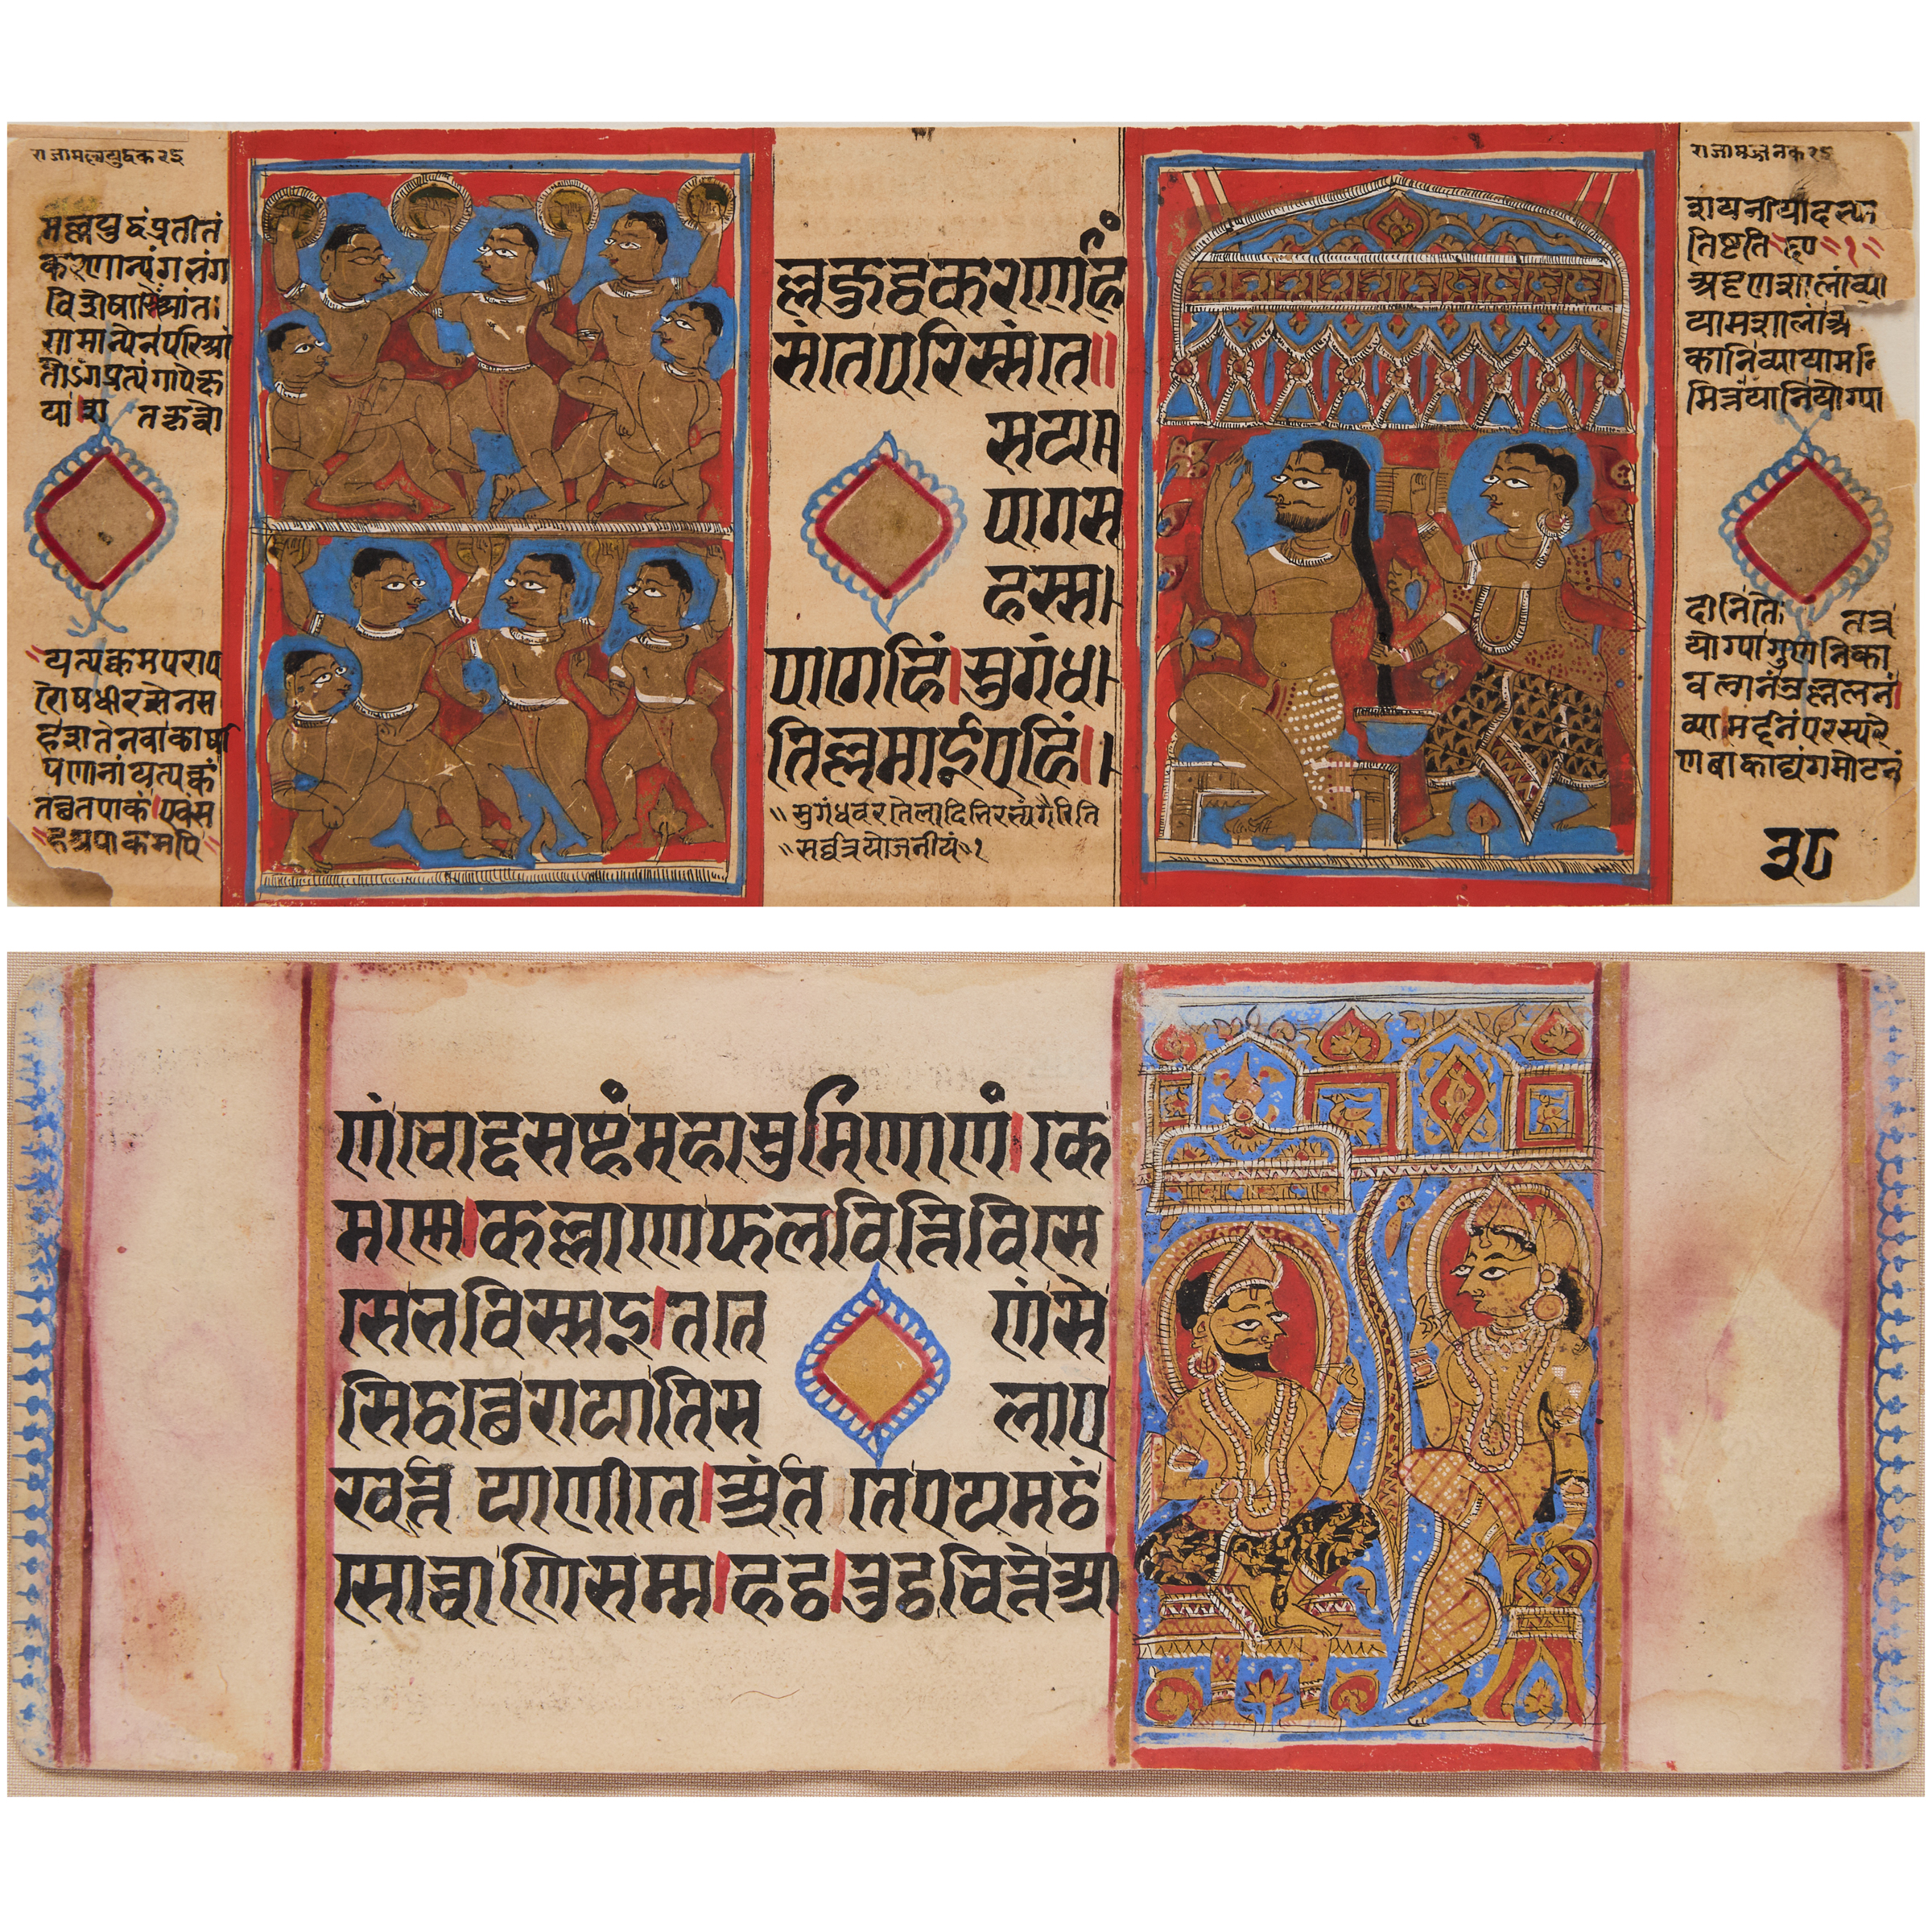 Two Illustrated Folios from the 2fb060d